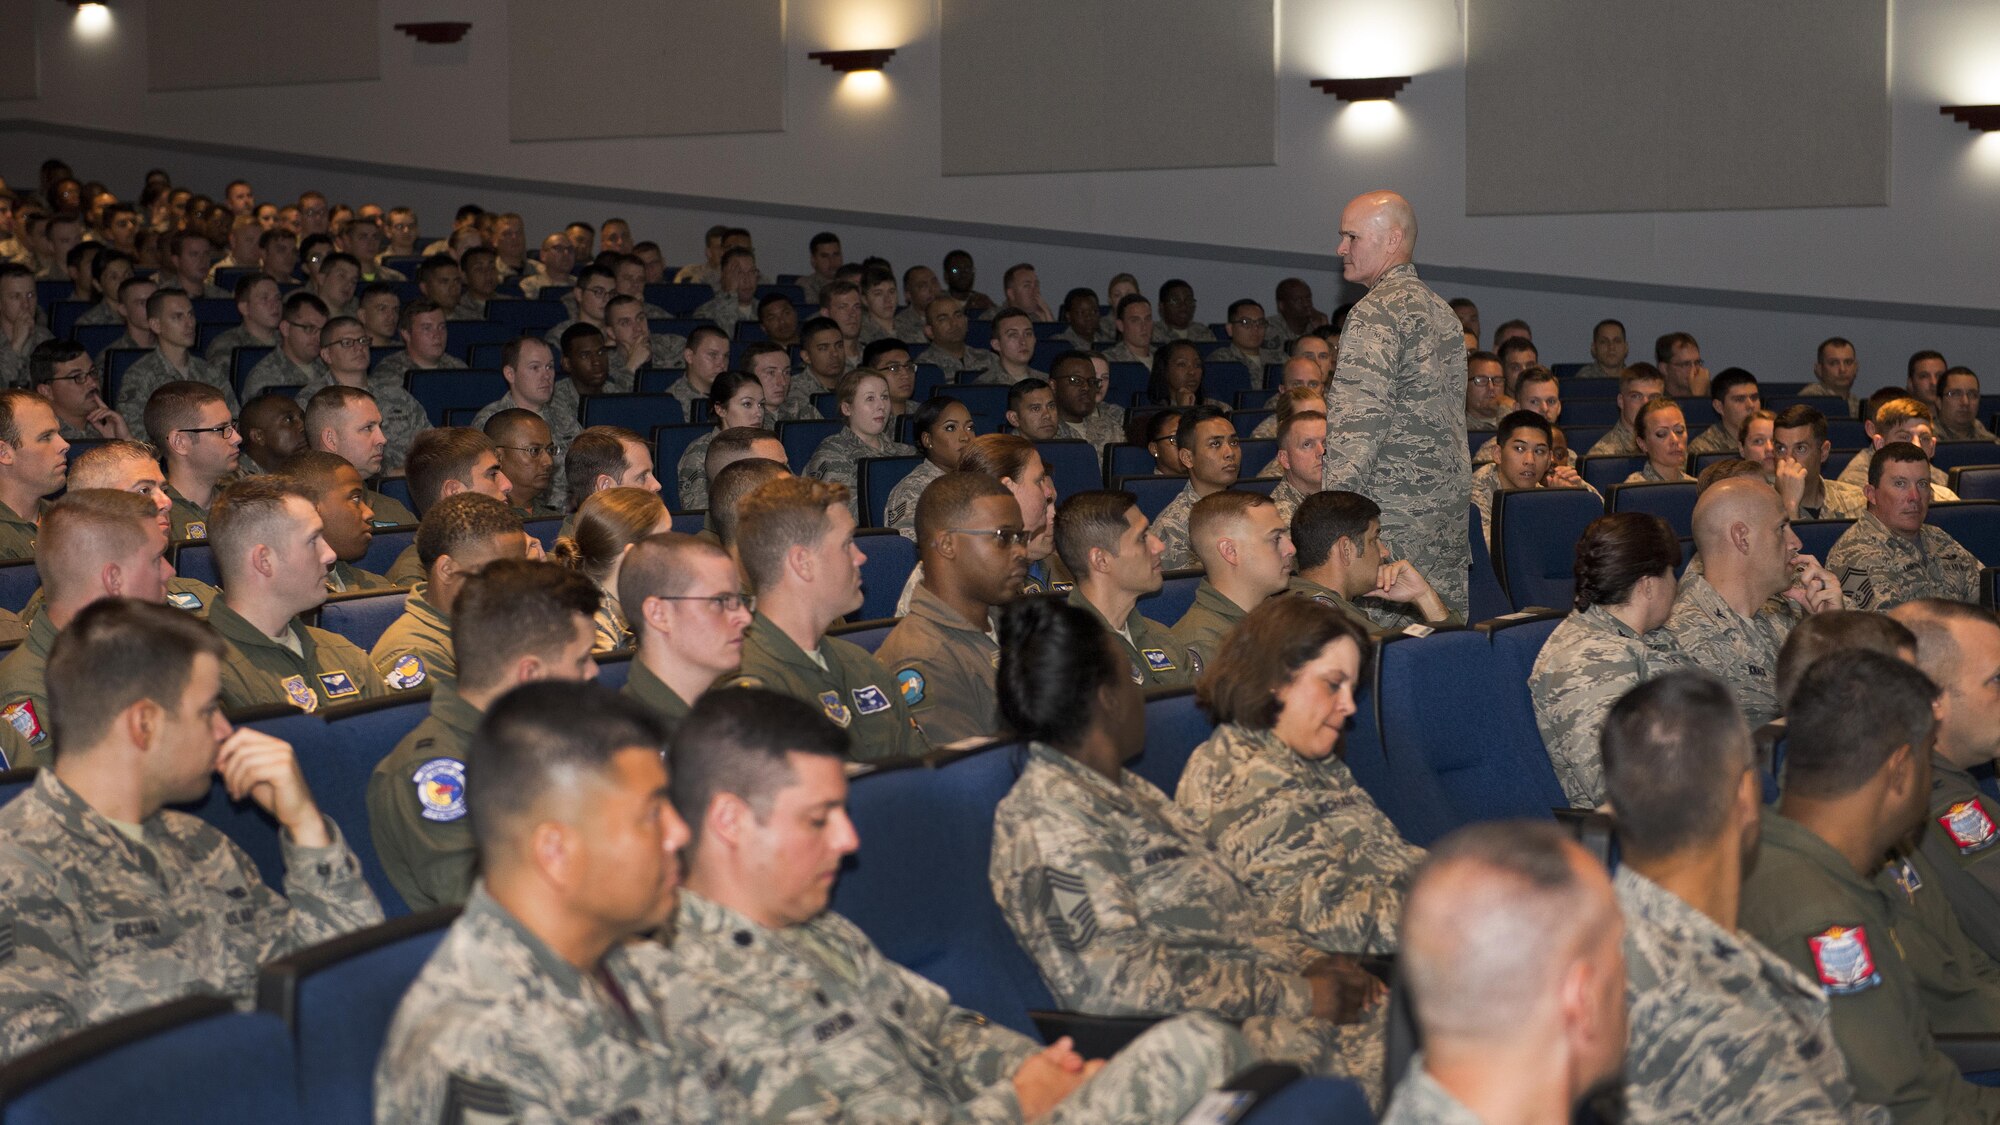 Gen. Carlton D. Everhart II, Air Mobility Command commander, speaks to Team Dover Airman at his Commander’s Call July 14, 2017, at Dover Air Force Base, Del. Everhart’s speech focused on the importance of the individual Airmen and their role in AMC’s overall rapid global mobility mission. (U.S. Air Force photo by Senior Airman Zachary Cacicia)